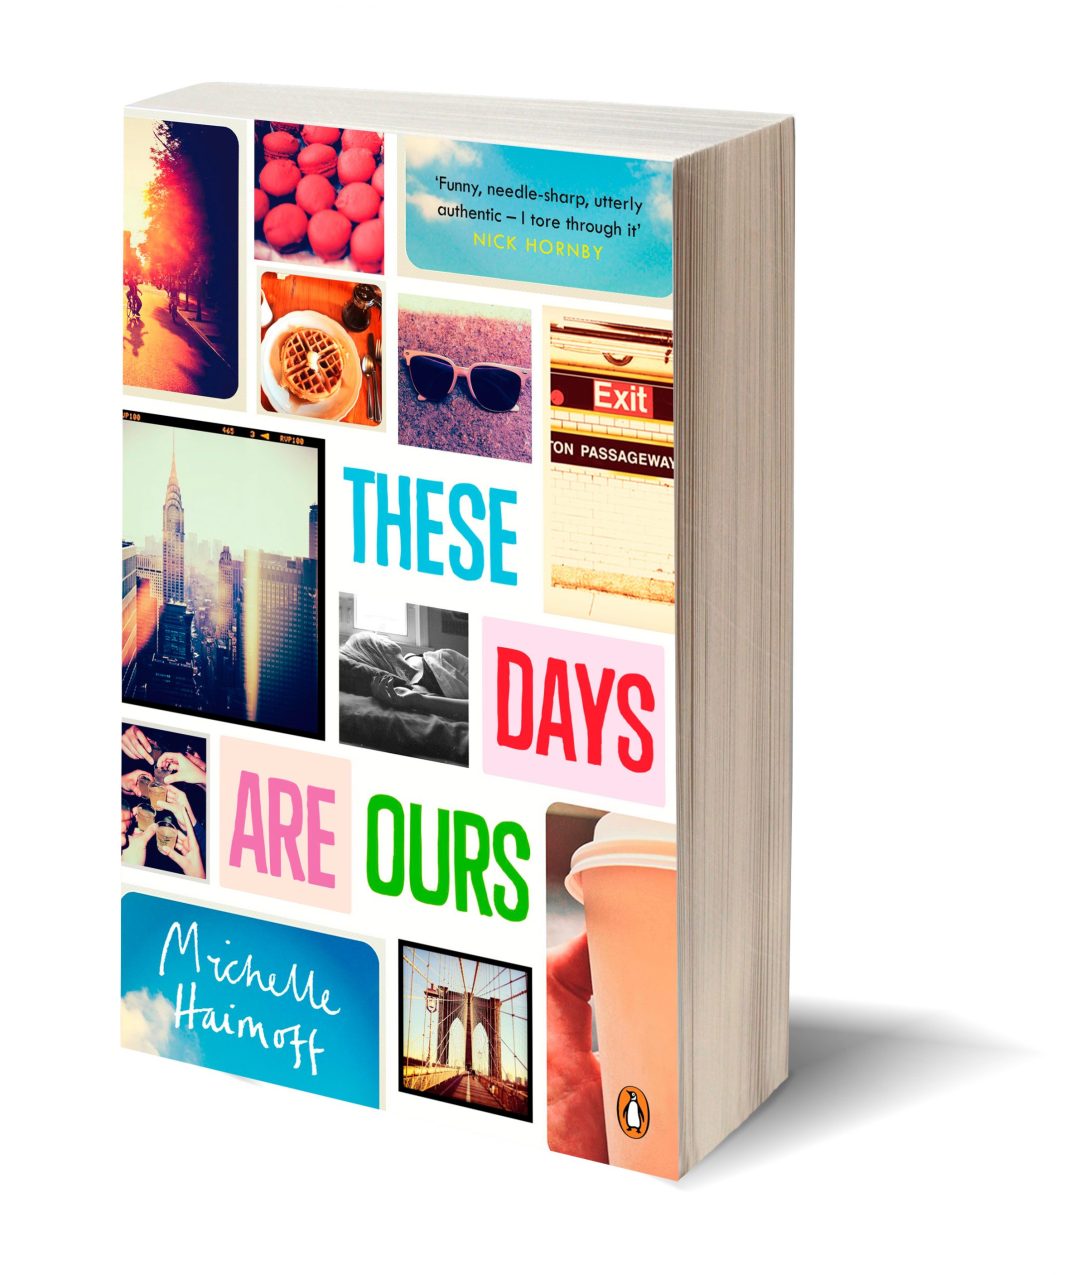 Paperback pick: These Days Are Ours